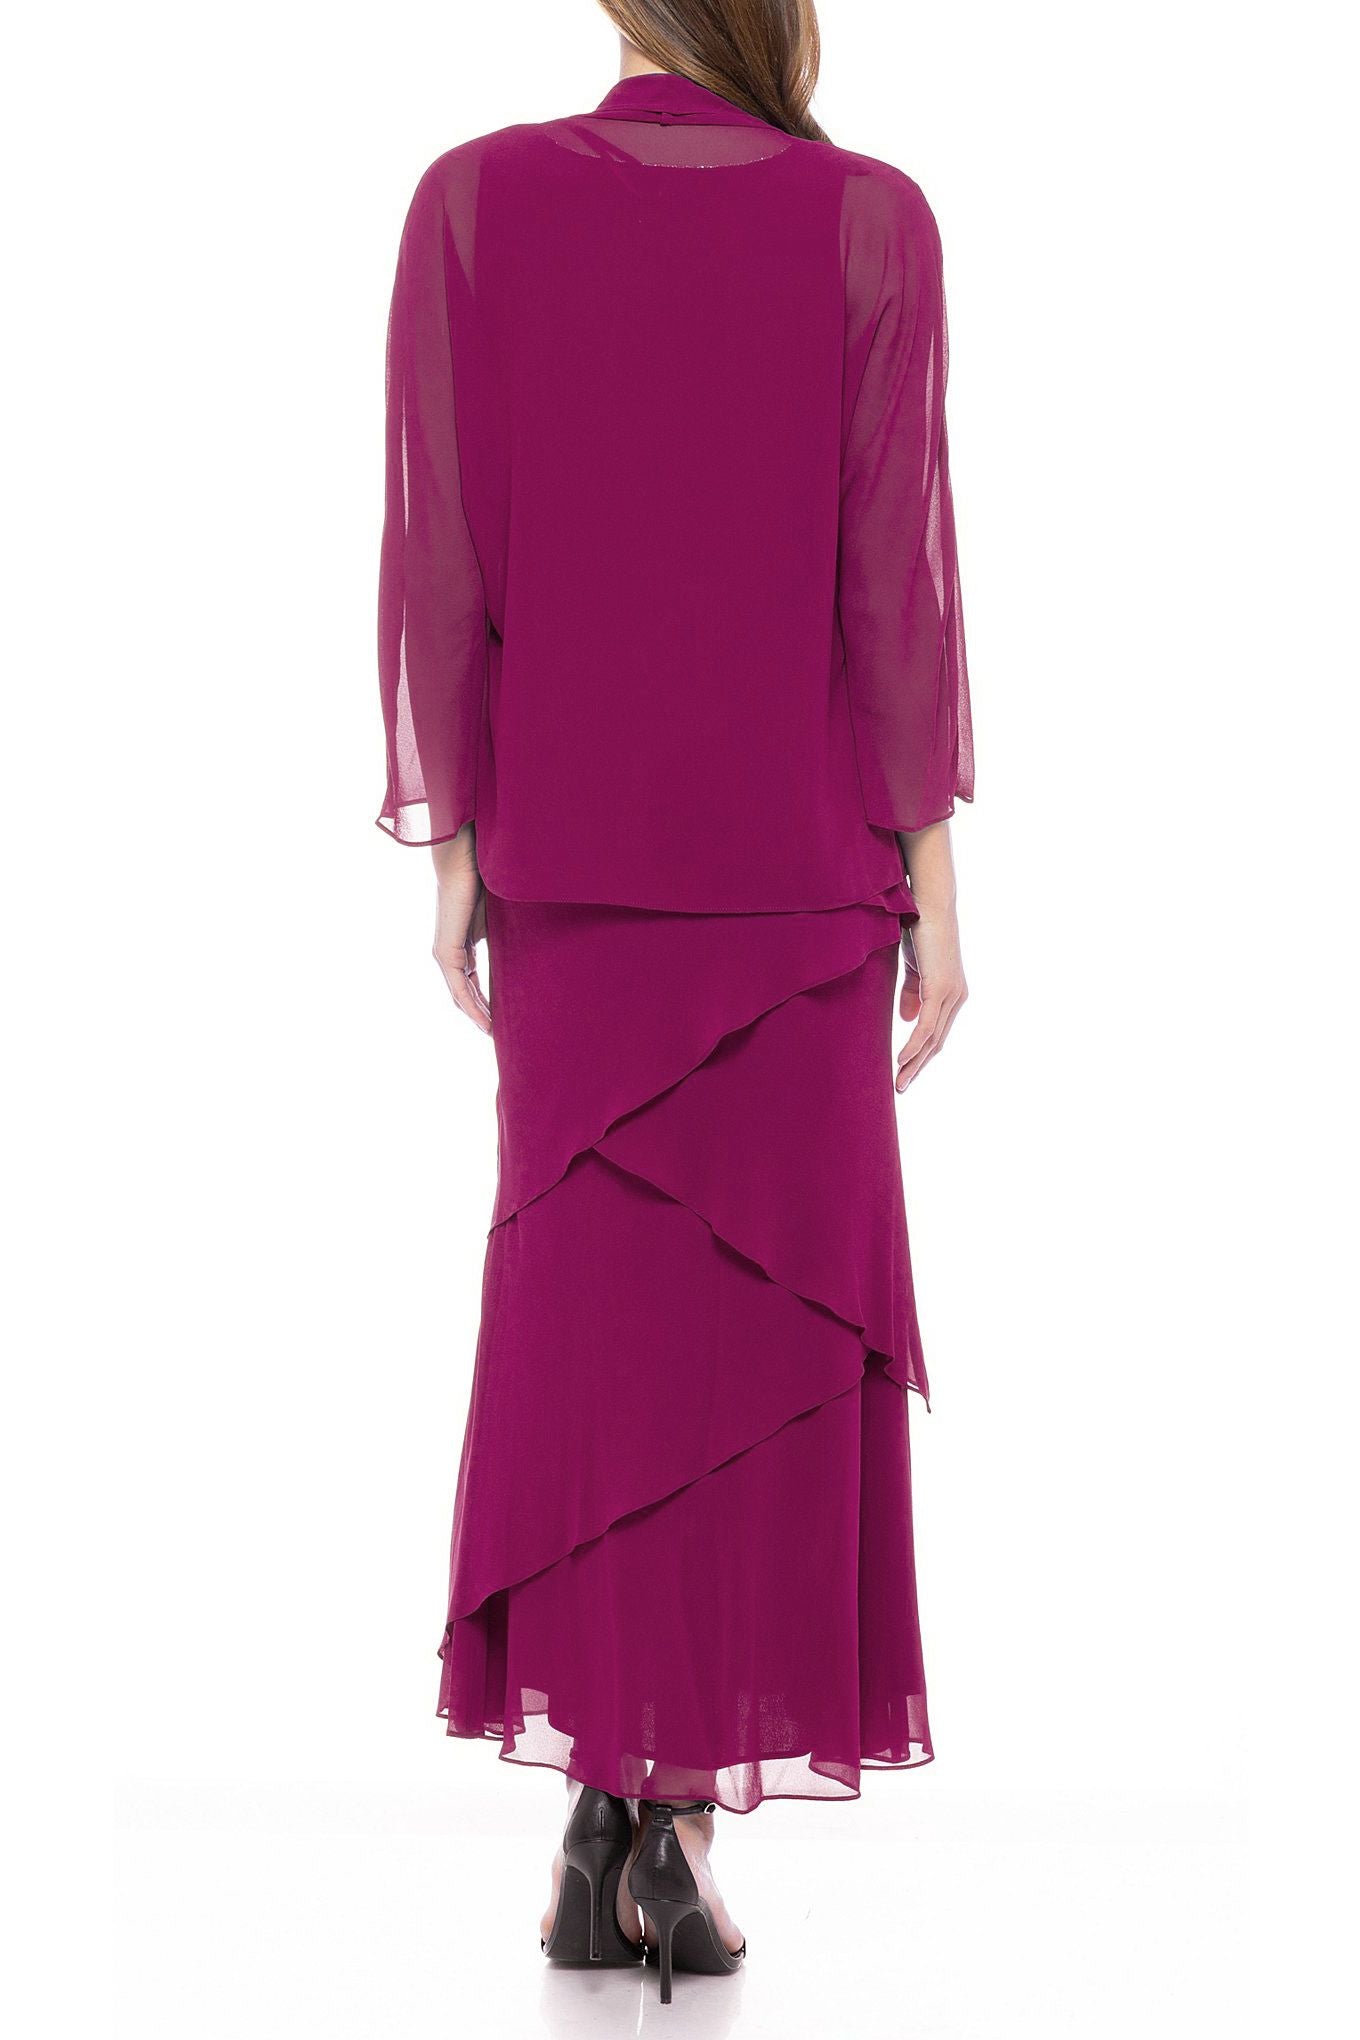 Mother of the Bride Dresses Tiered Solid Chiffon Dress with Matching Jacket Set Fuchsia